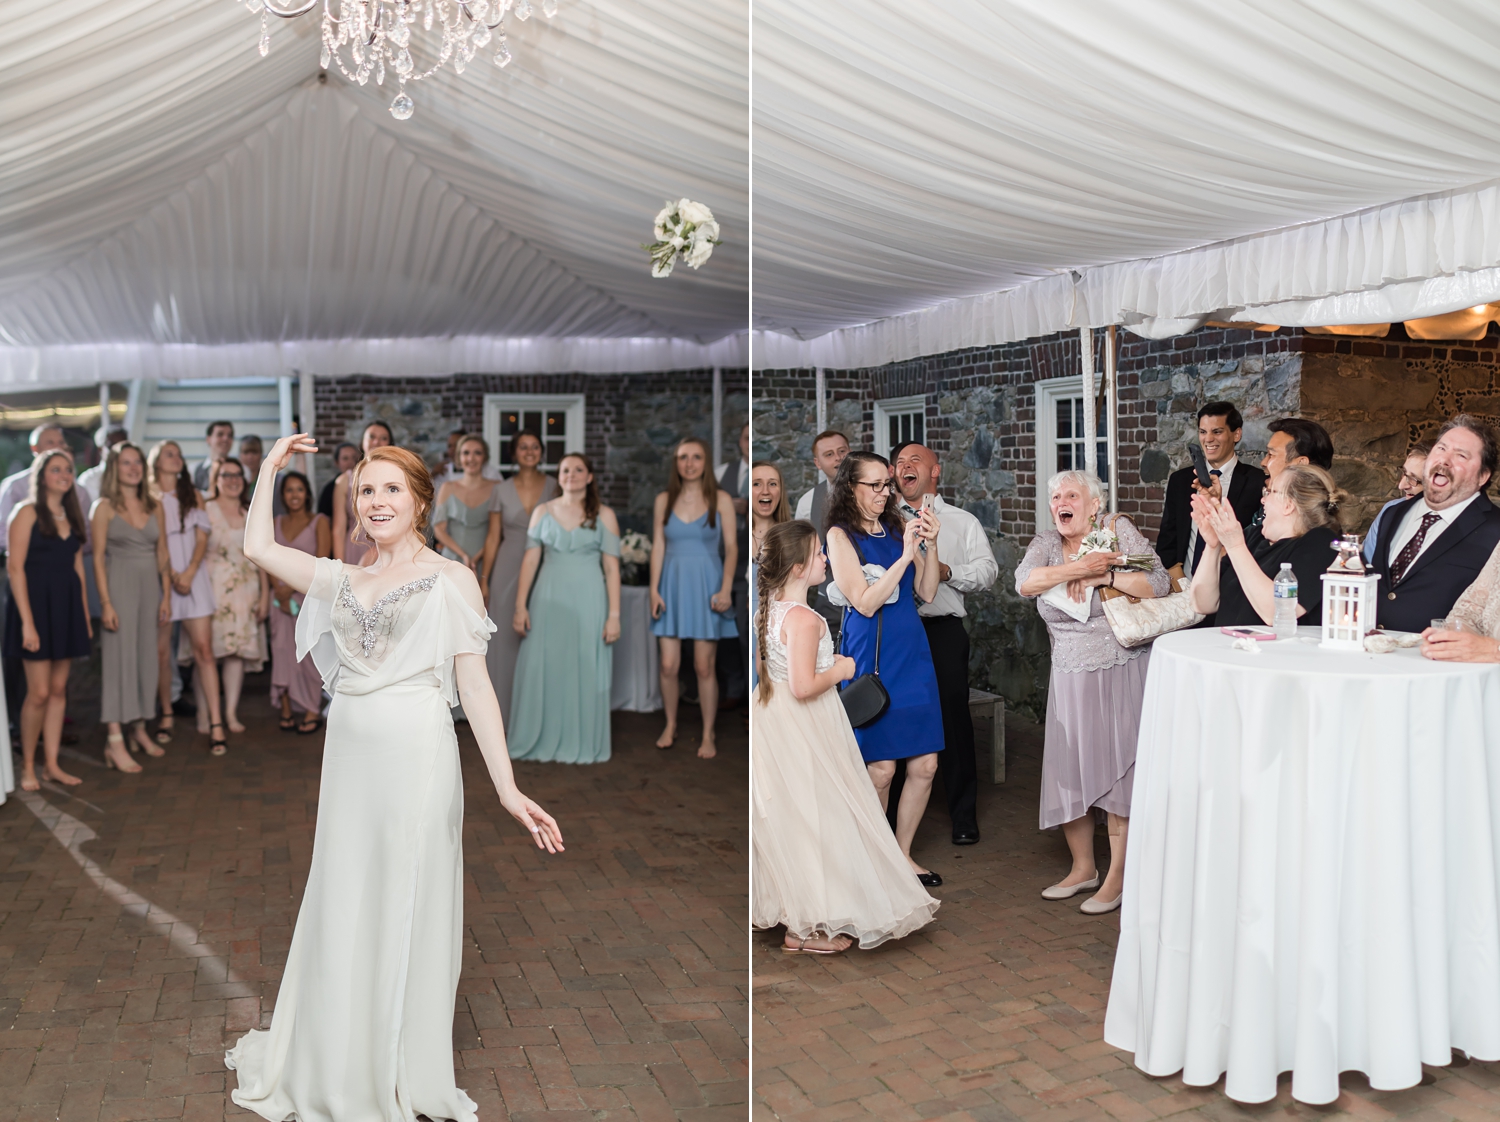  Jessica accidentally threw the bouquet to her grandmother to avoid hitting the chandelier! It was amazing.  